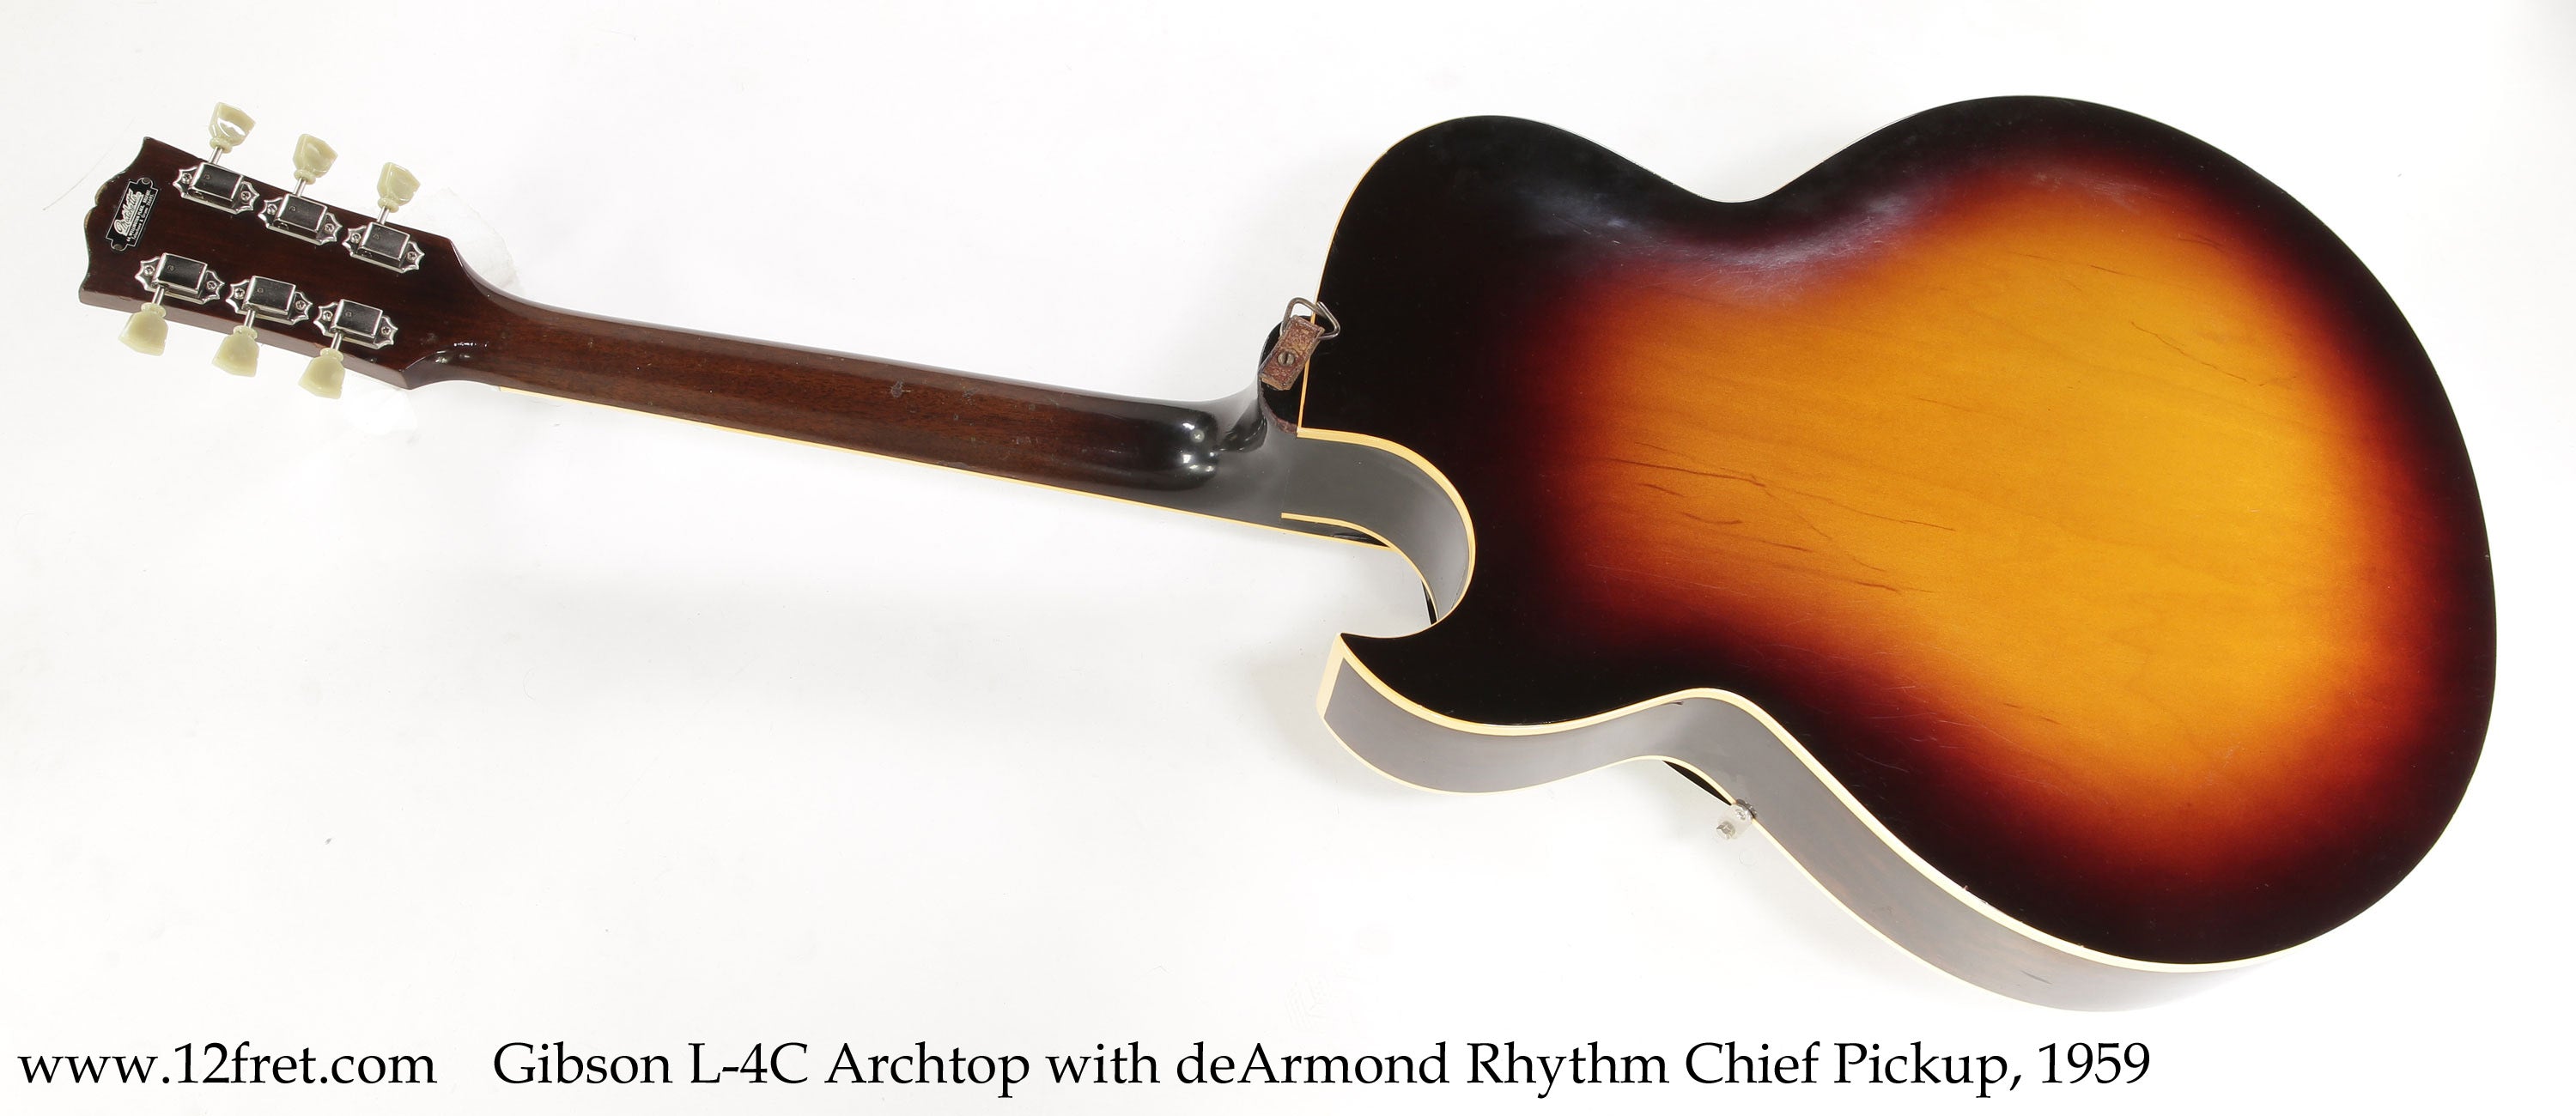 Gibson L-4C Archtop with DeArmond Rhythm Chief Pickup, 1959 - The Twelfth Fret